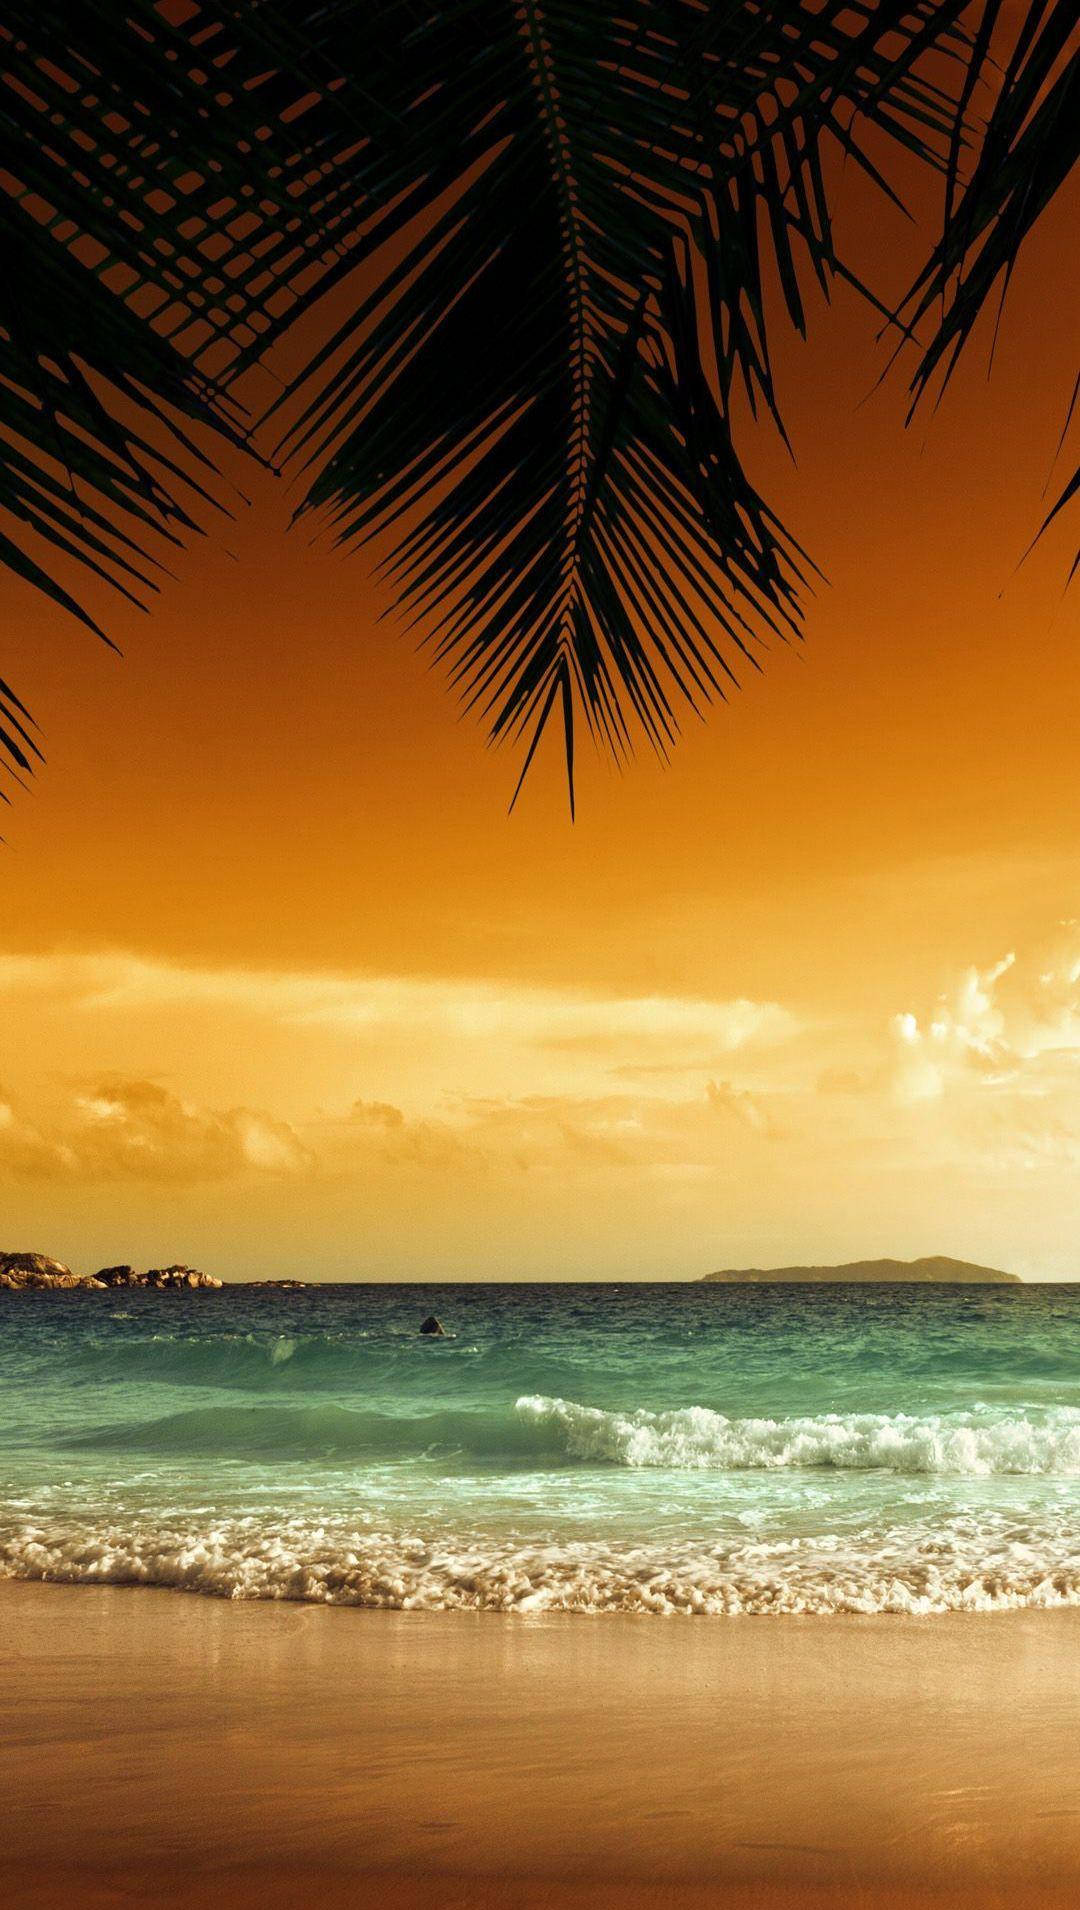 4k Iphone Coconut Leaves Sunset Beach Background